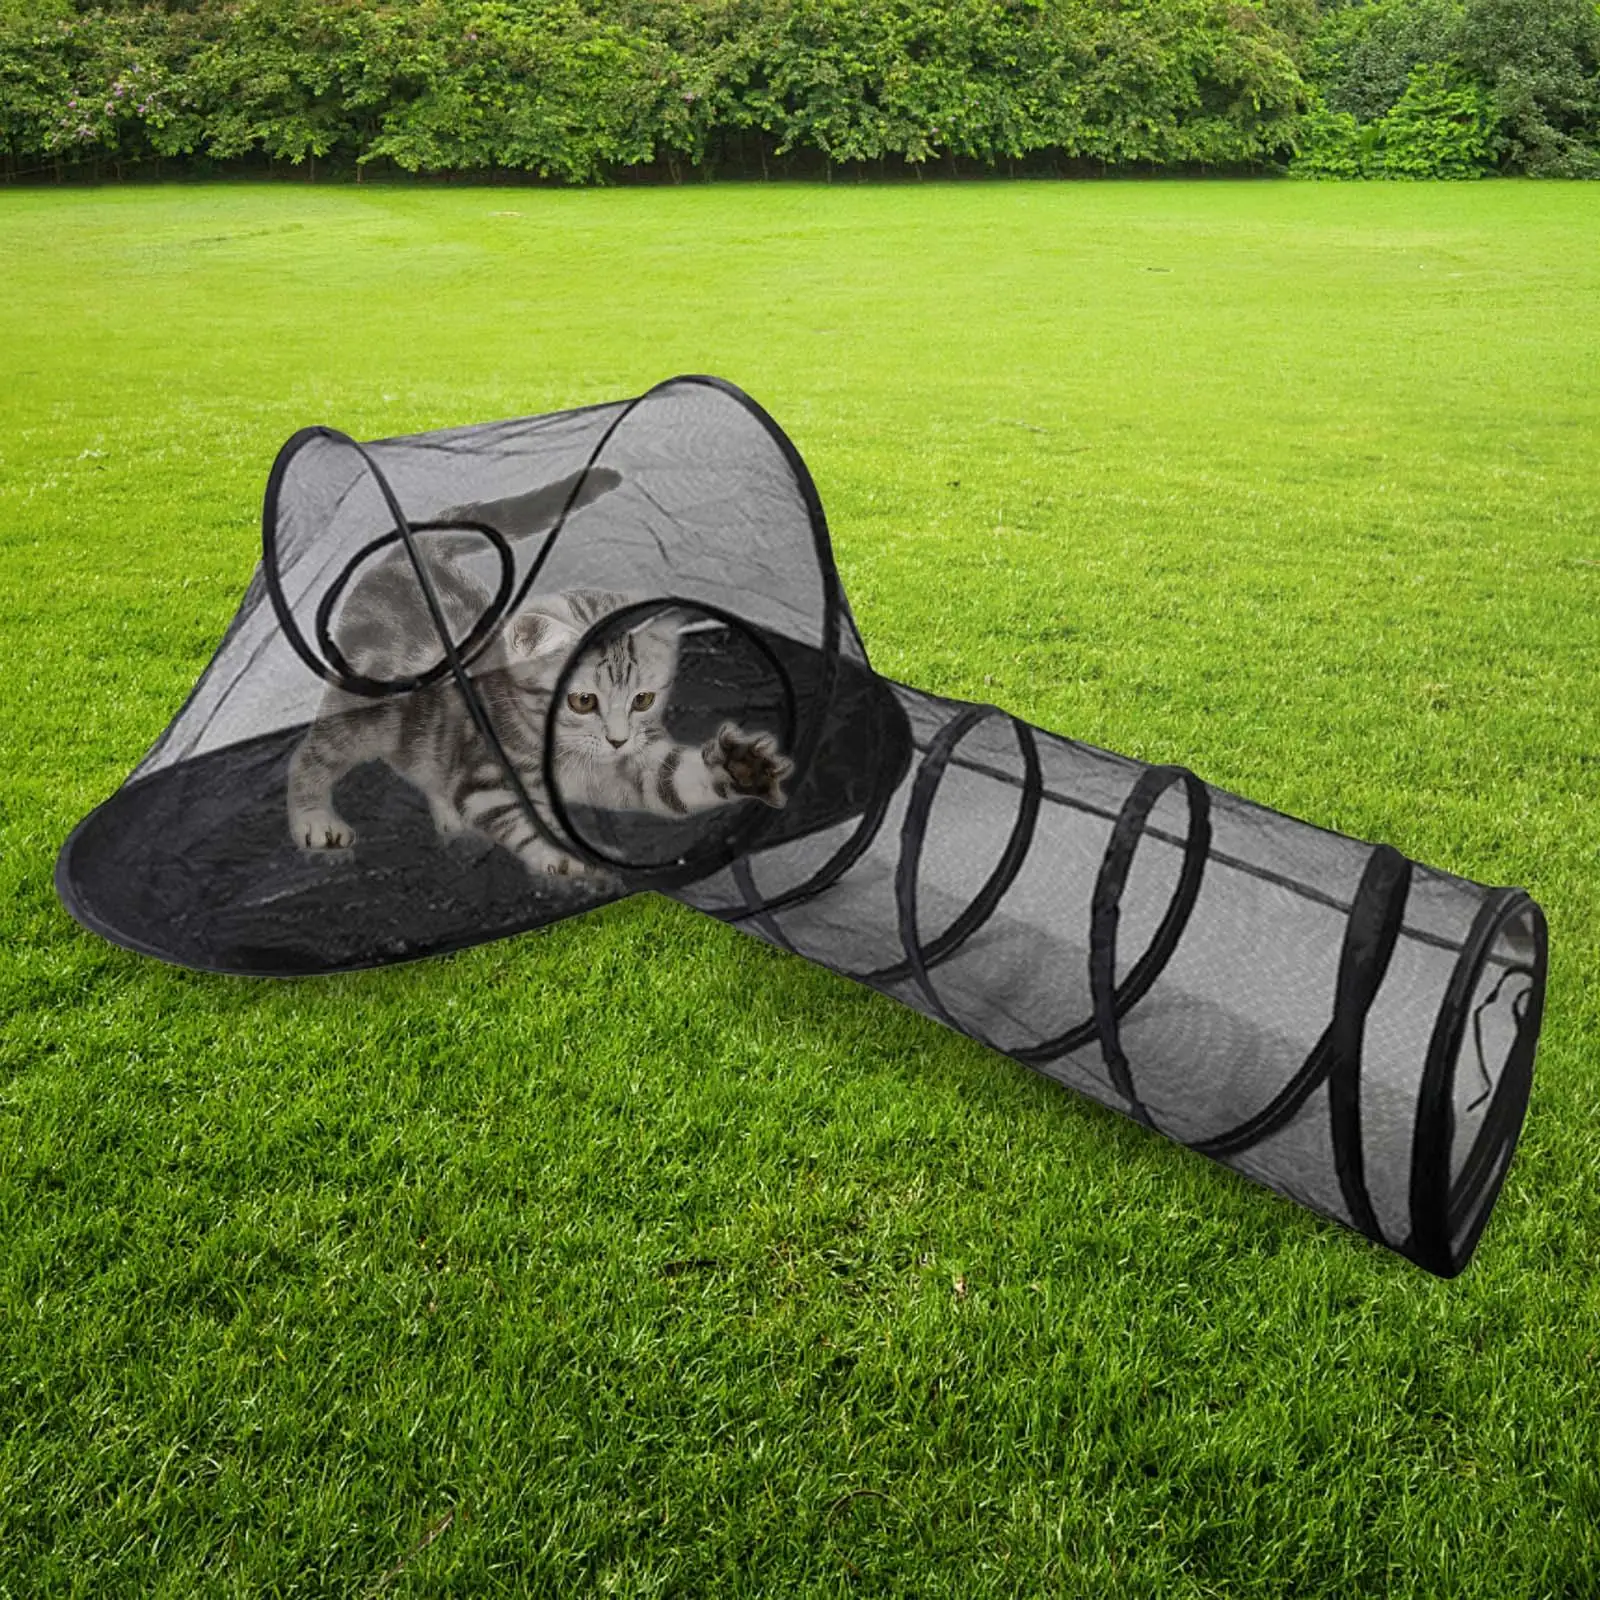 Cat Tent and Tunnel Outdoor Foldable Exercise Tent Puppy Playhouse Zipper Entrance for Puppy Small Dog Small Animals Kitten Cats